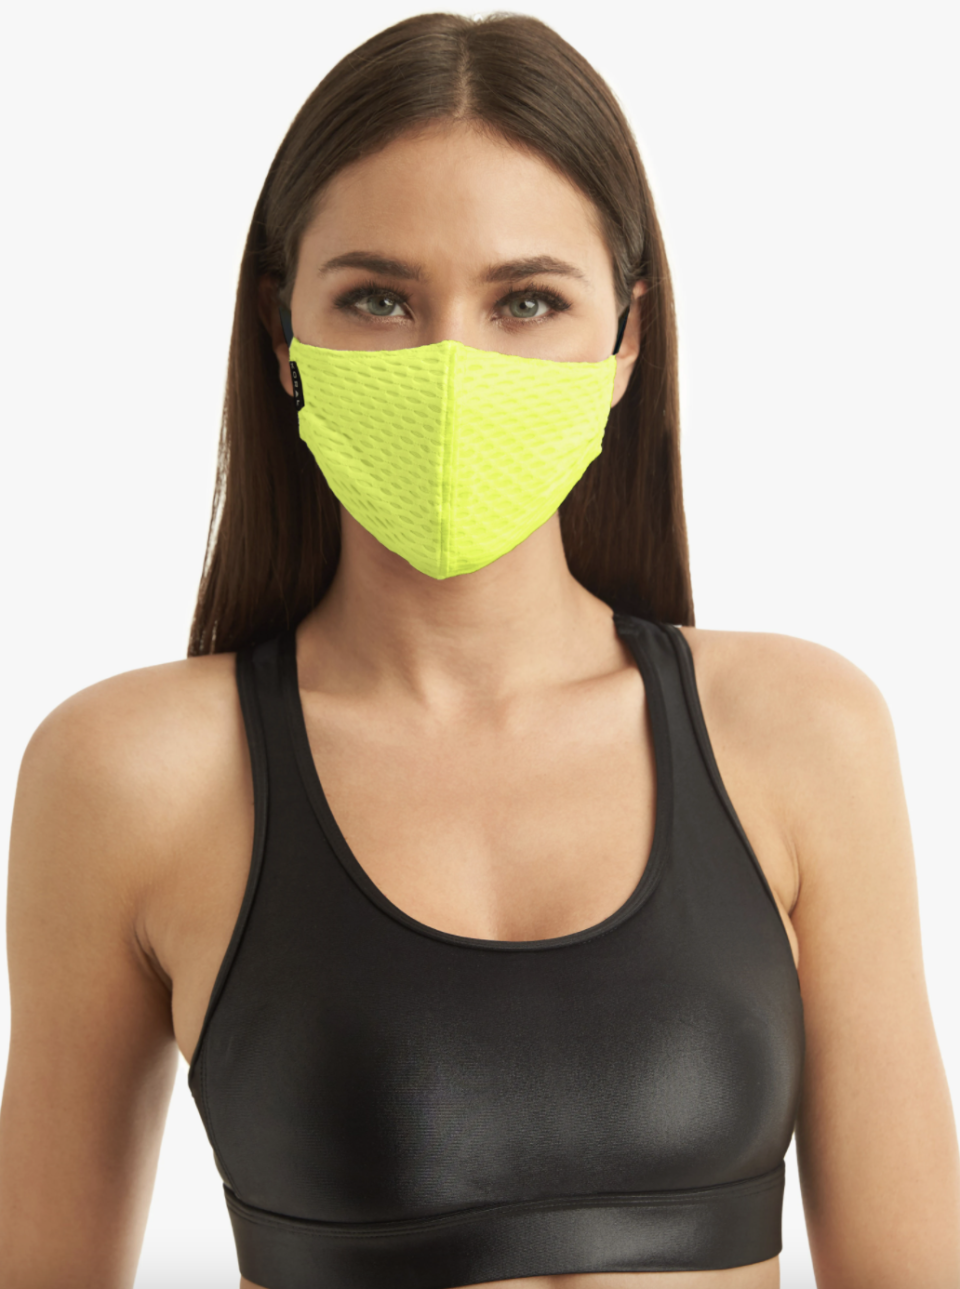 brunette woman wearing black sports bra and neon lime face mask